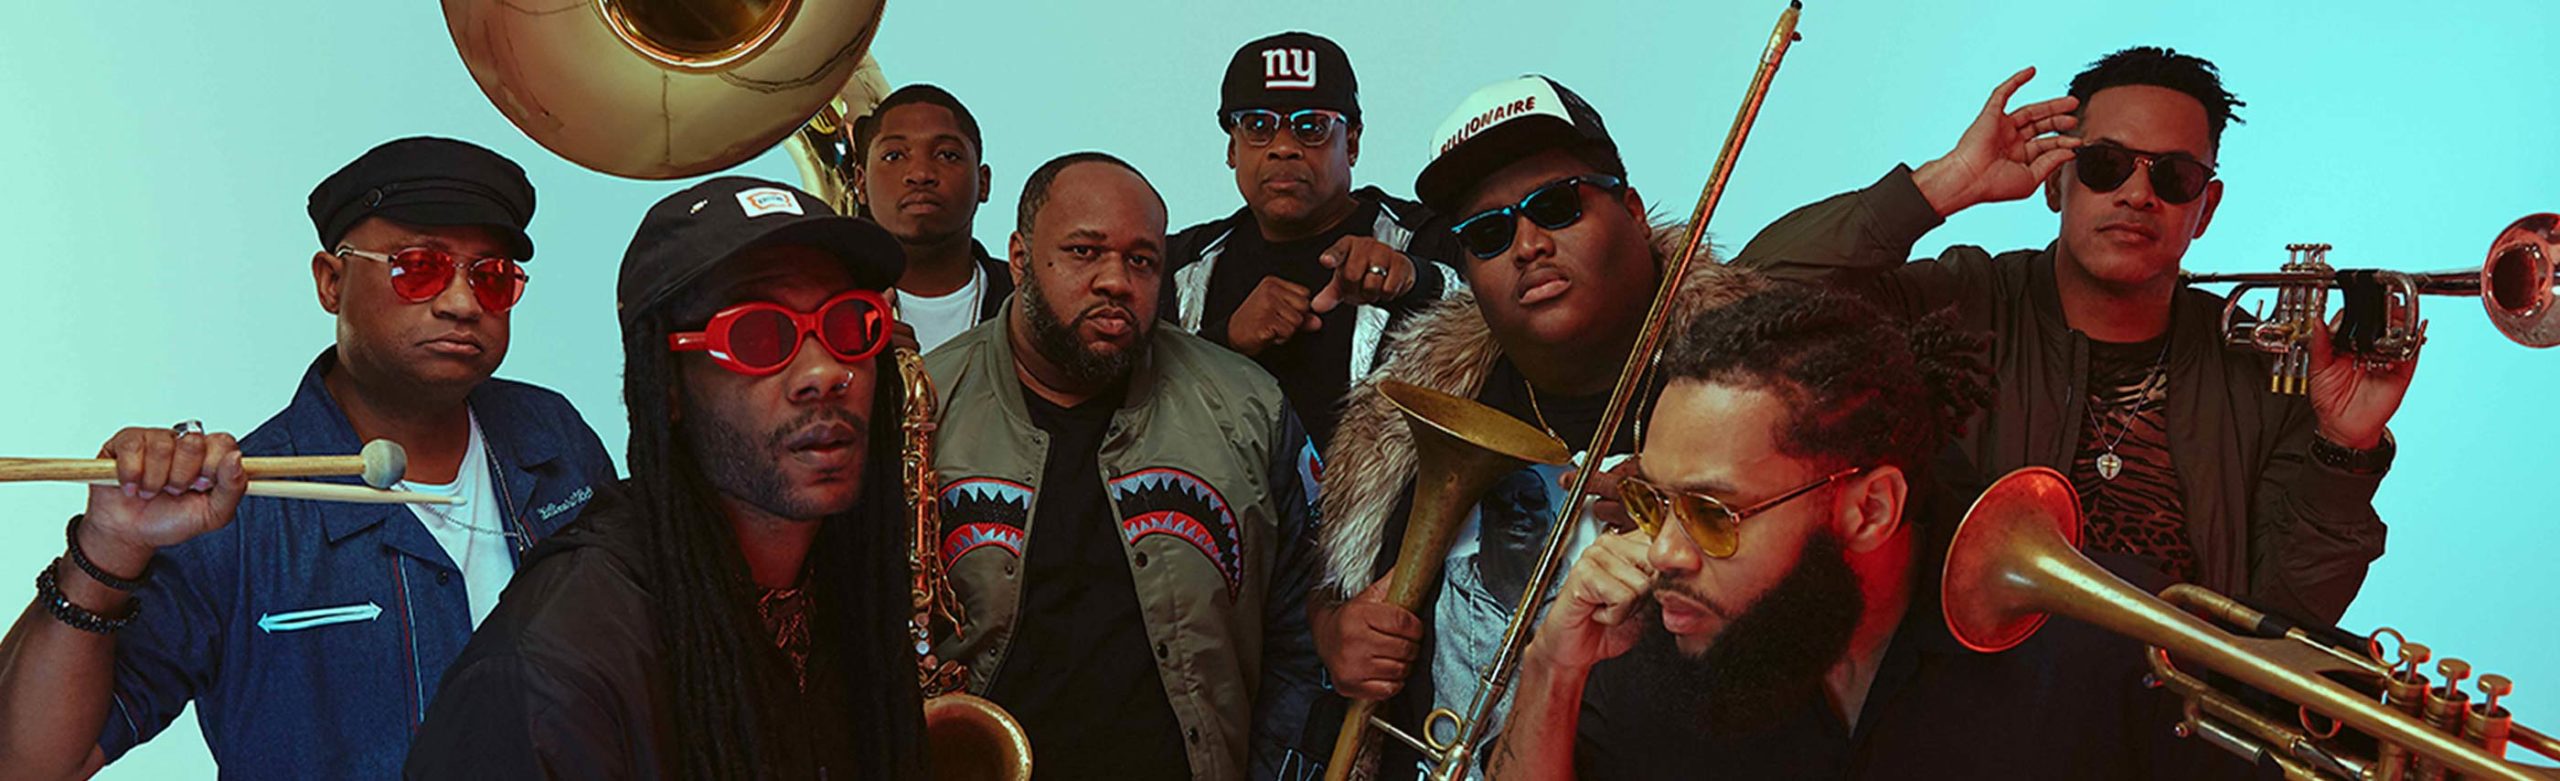 The Soul Rebels Tickets Giveaway 2022 Image